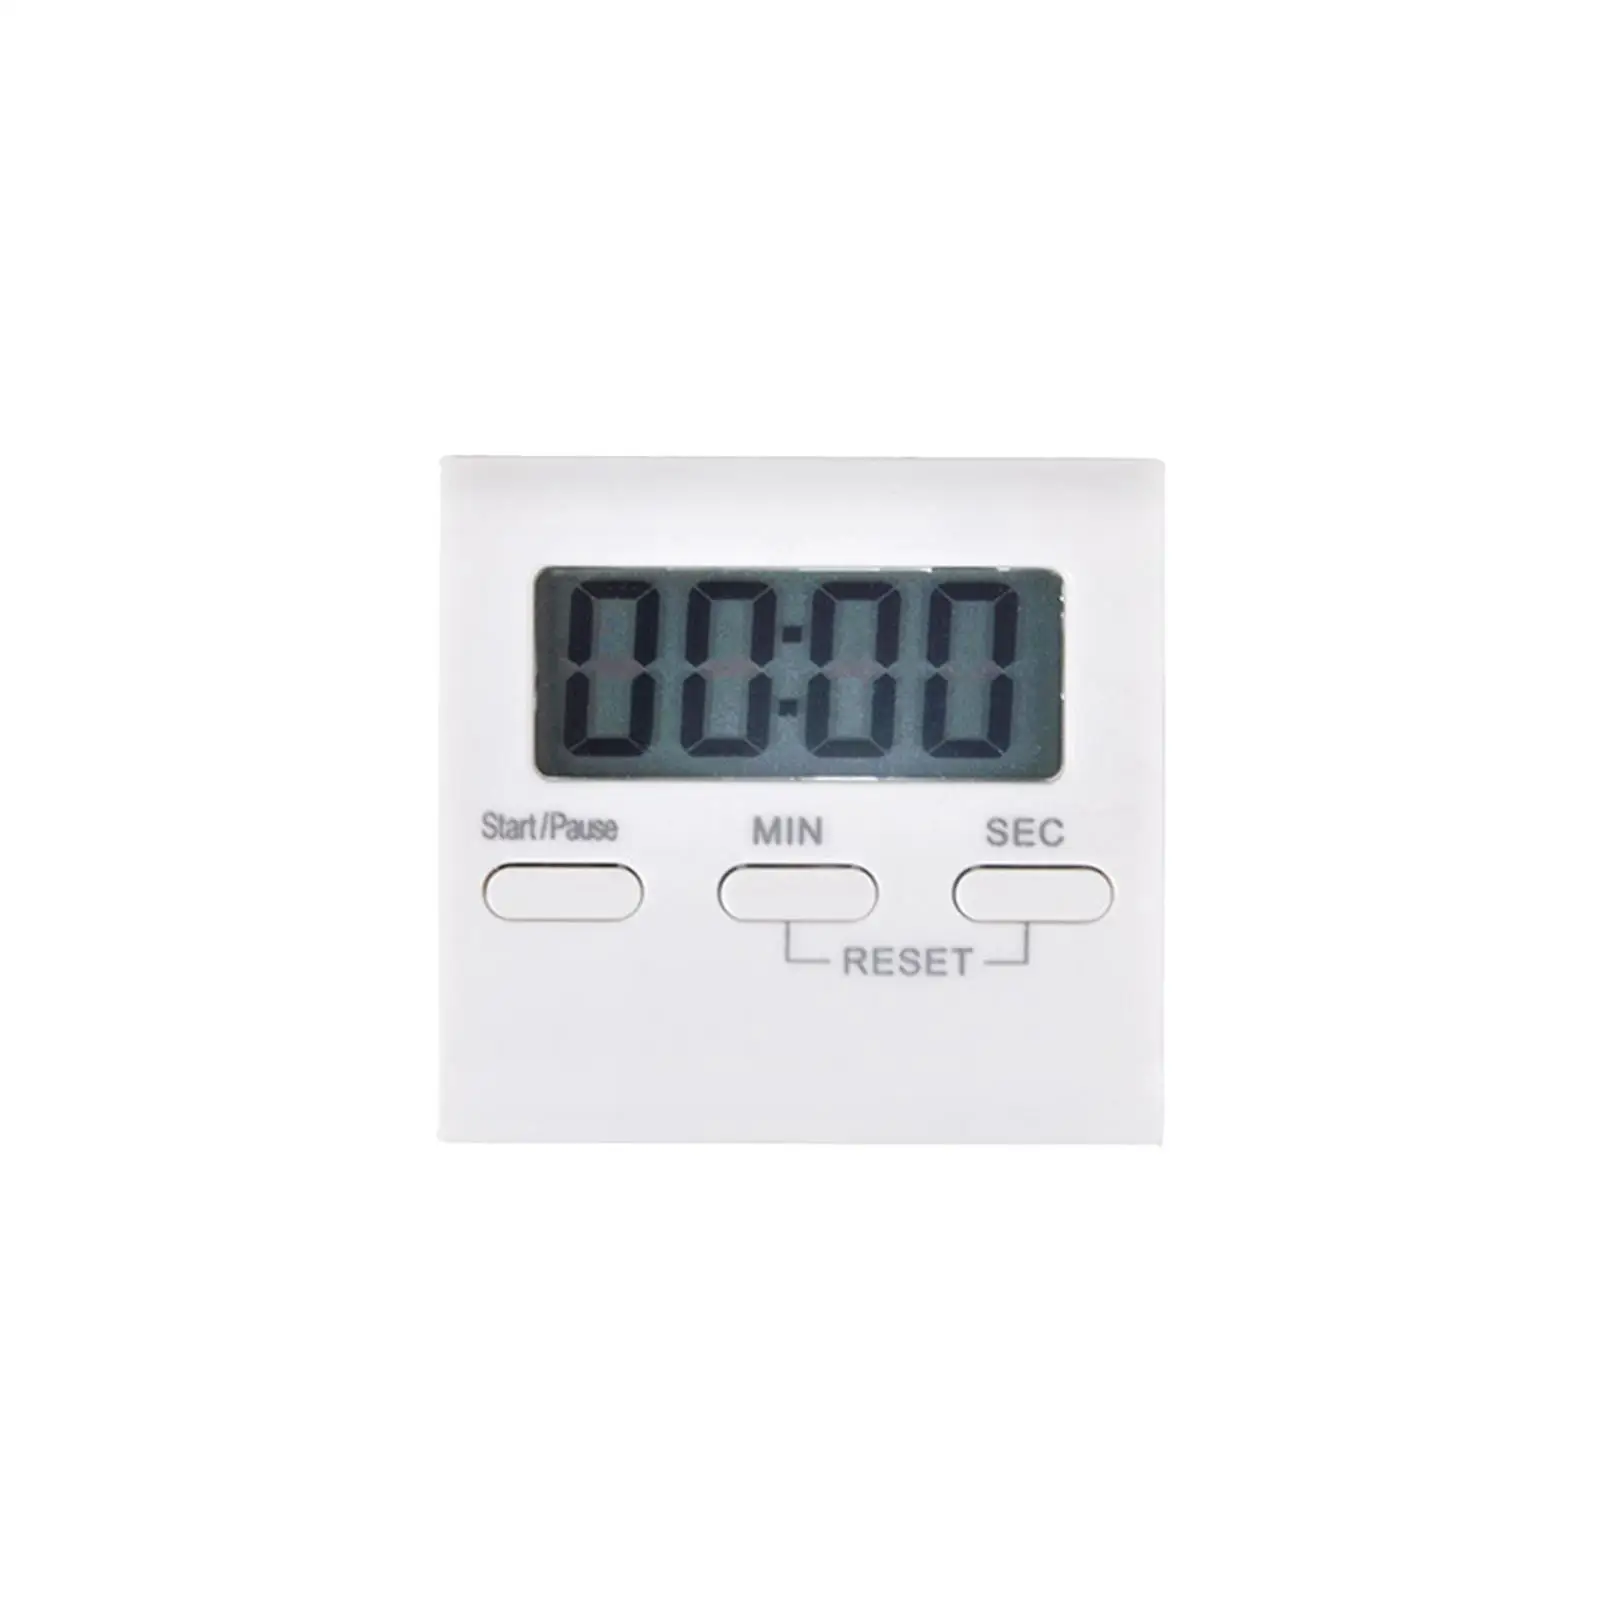 Cooking Timer Classroom Timer Cooking Supplies Multifunction Timing Clocks Kitchen Timer Baking Clock for Office Cooking Sports